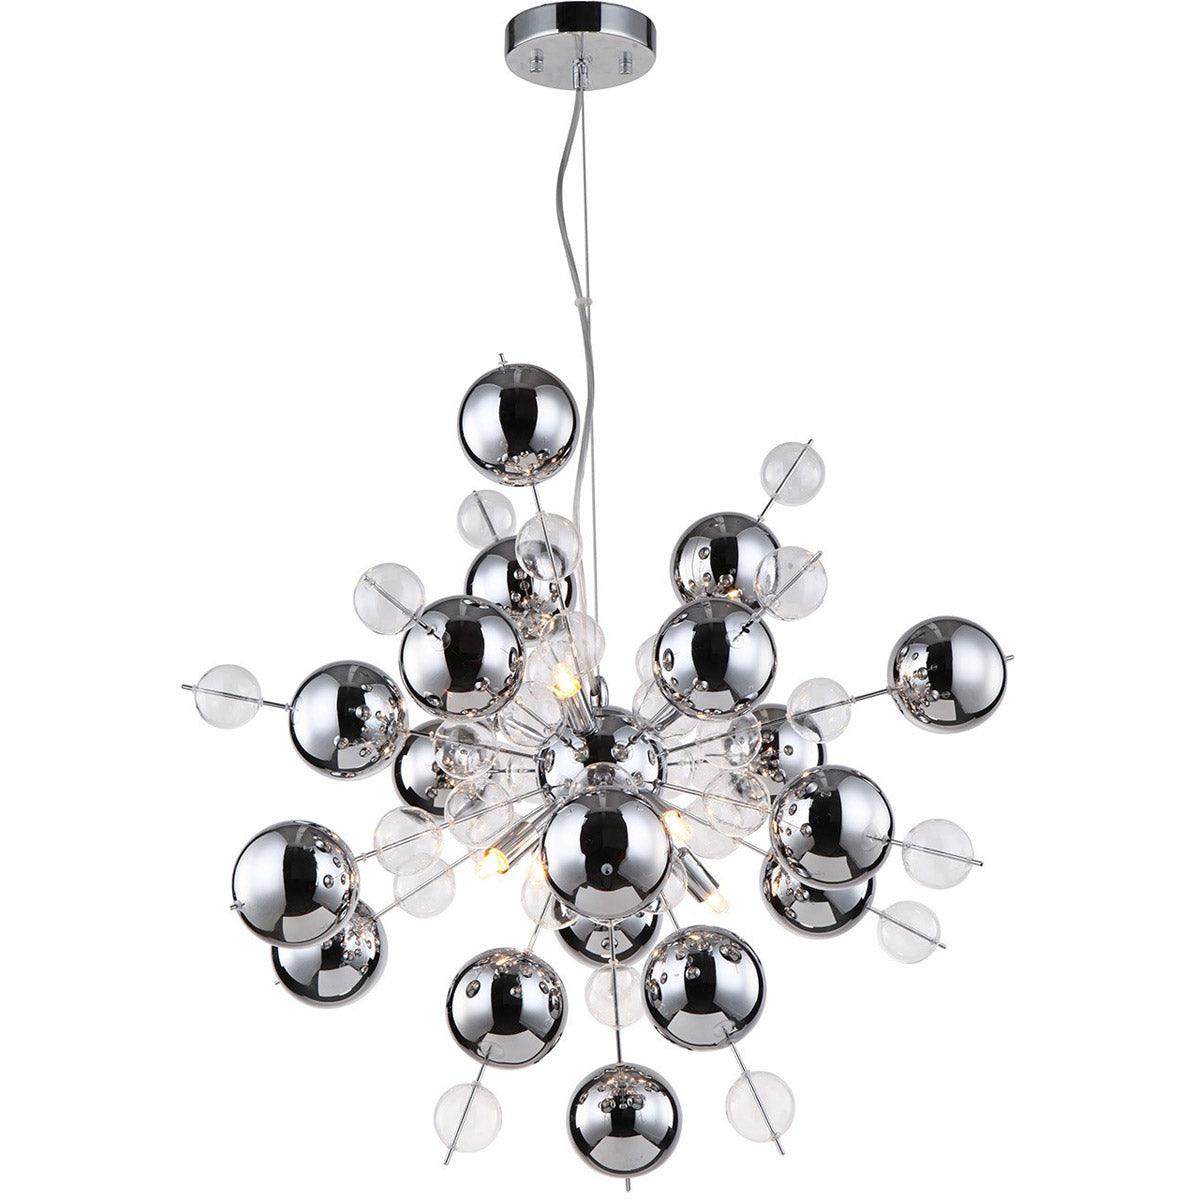 Chrome Frame with Chrome and Clear Glass Globe Chandelier - LV LIGHTING